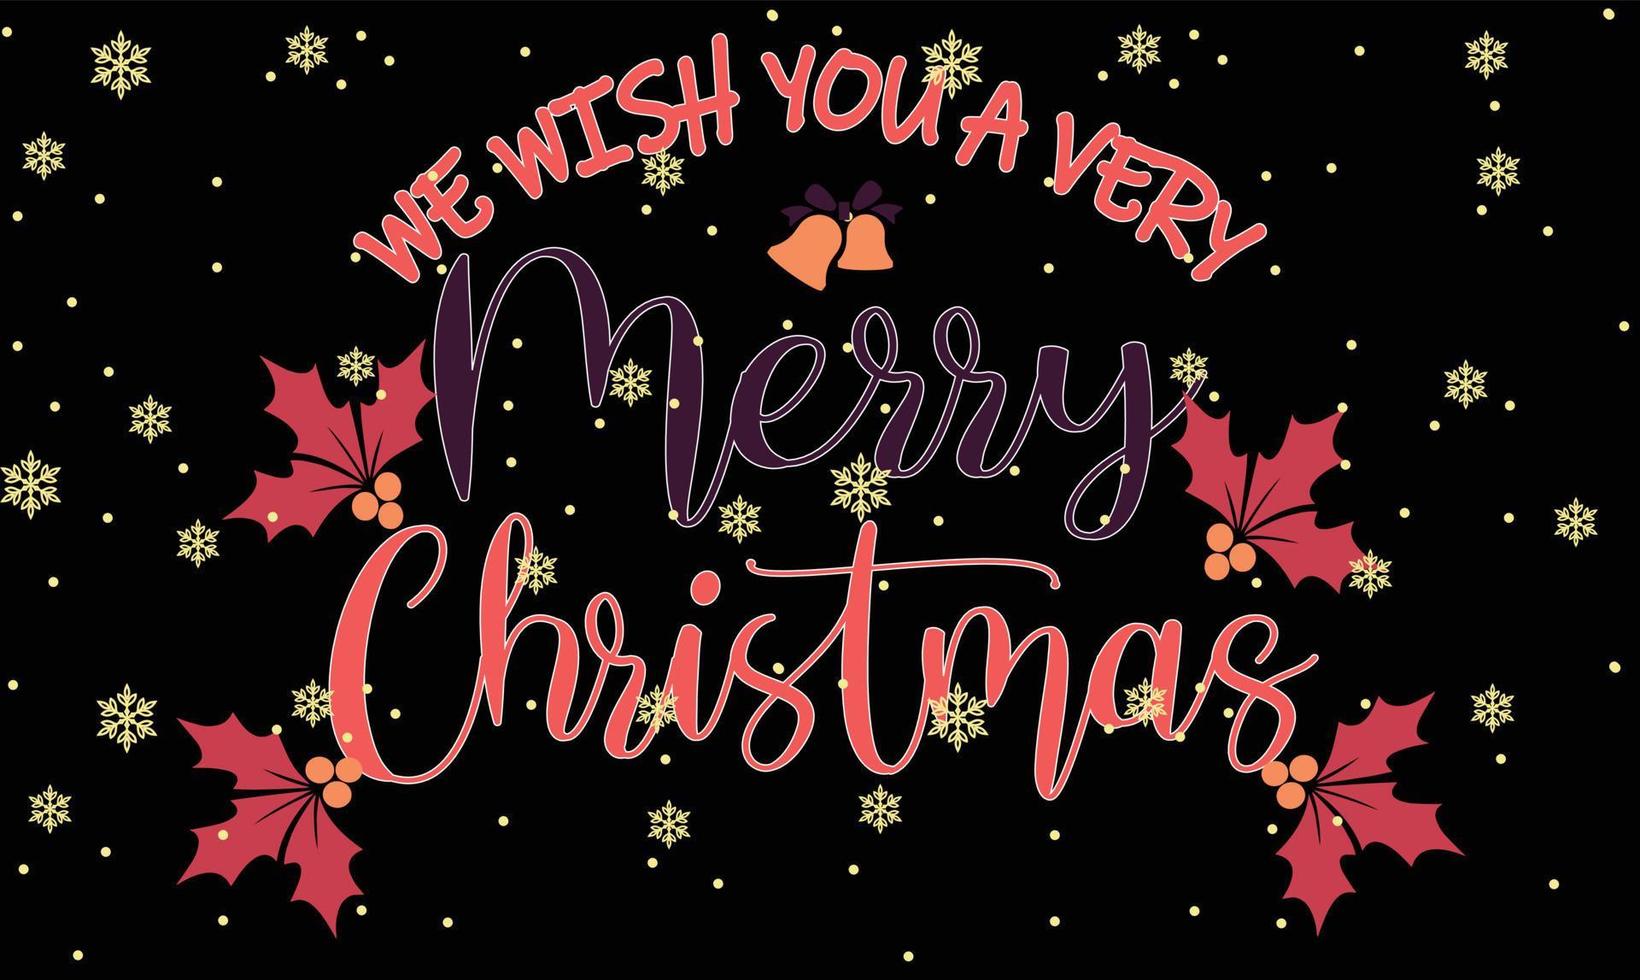 We Wish You A Very Merry Christmas 03 Merry Christmas and Happy Holidays Typography set vector